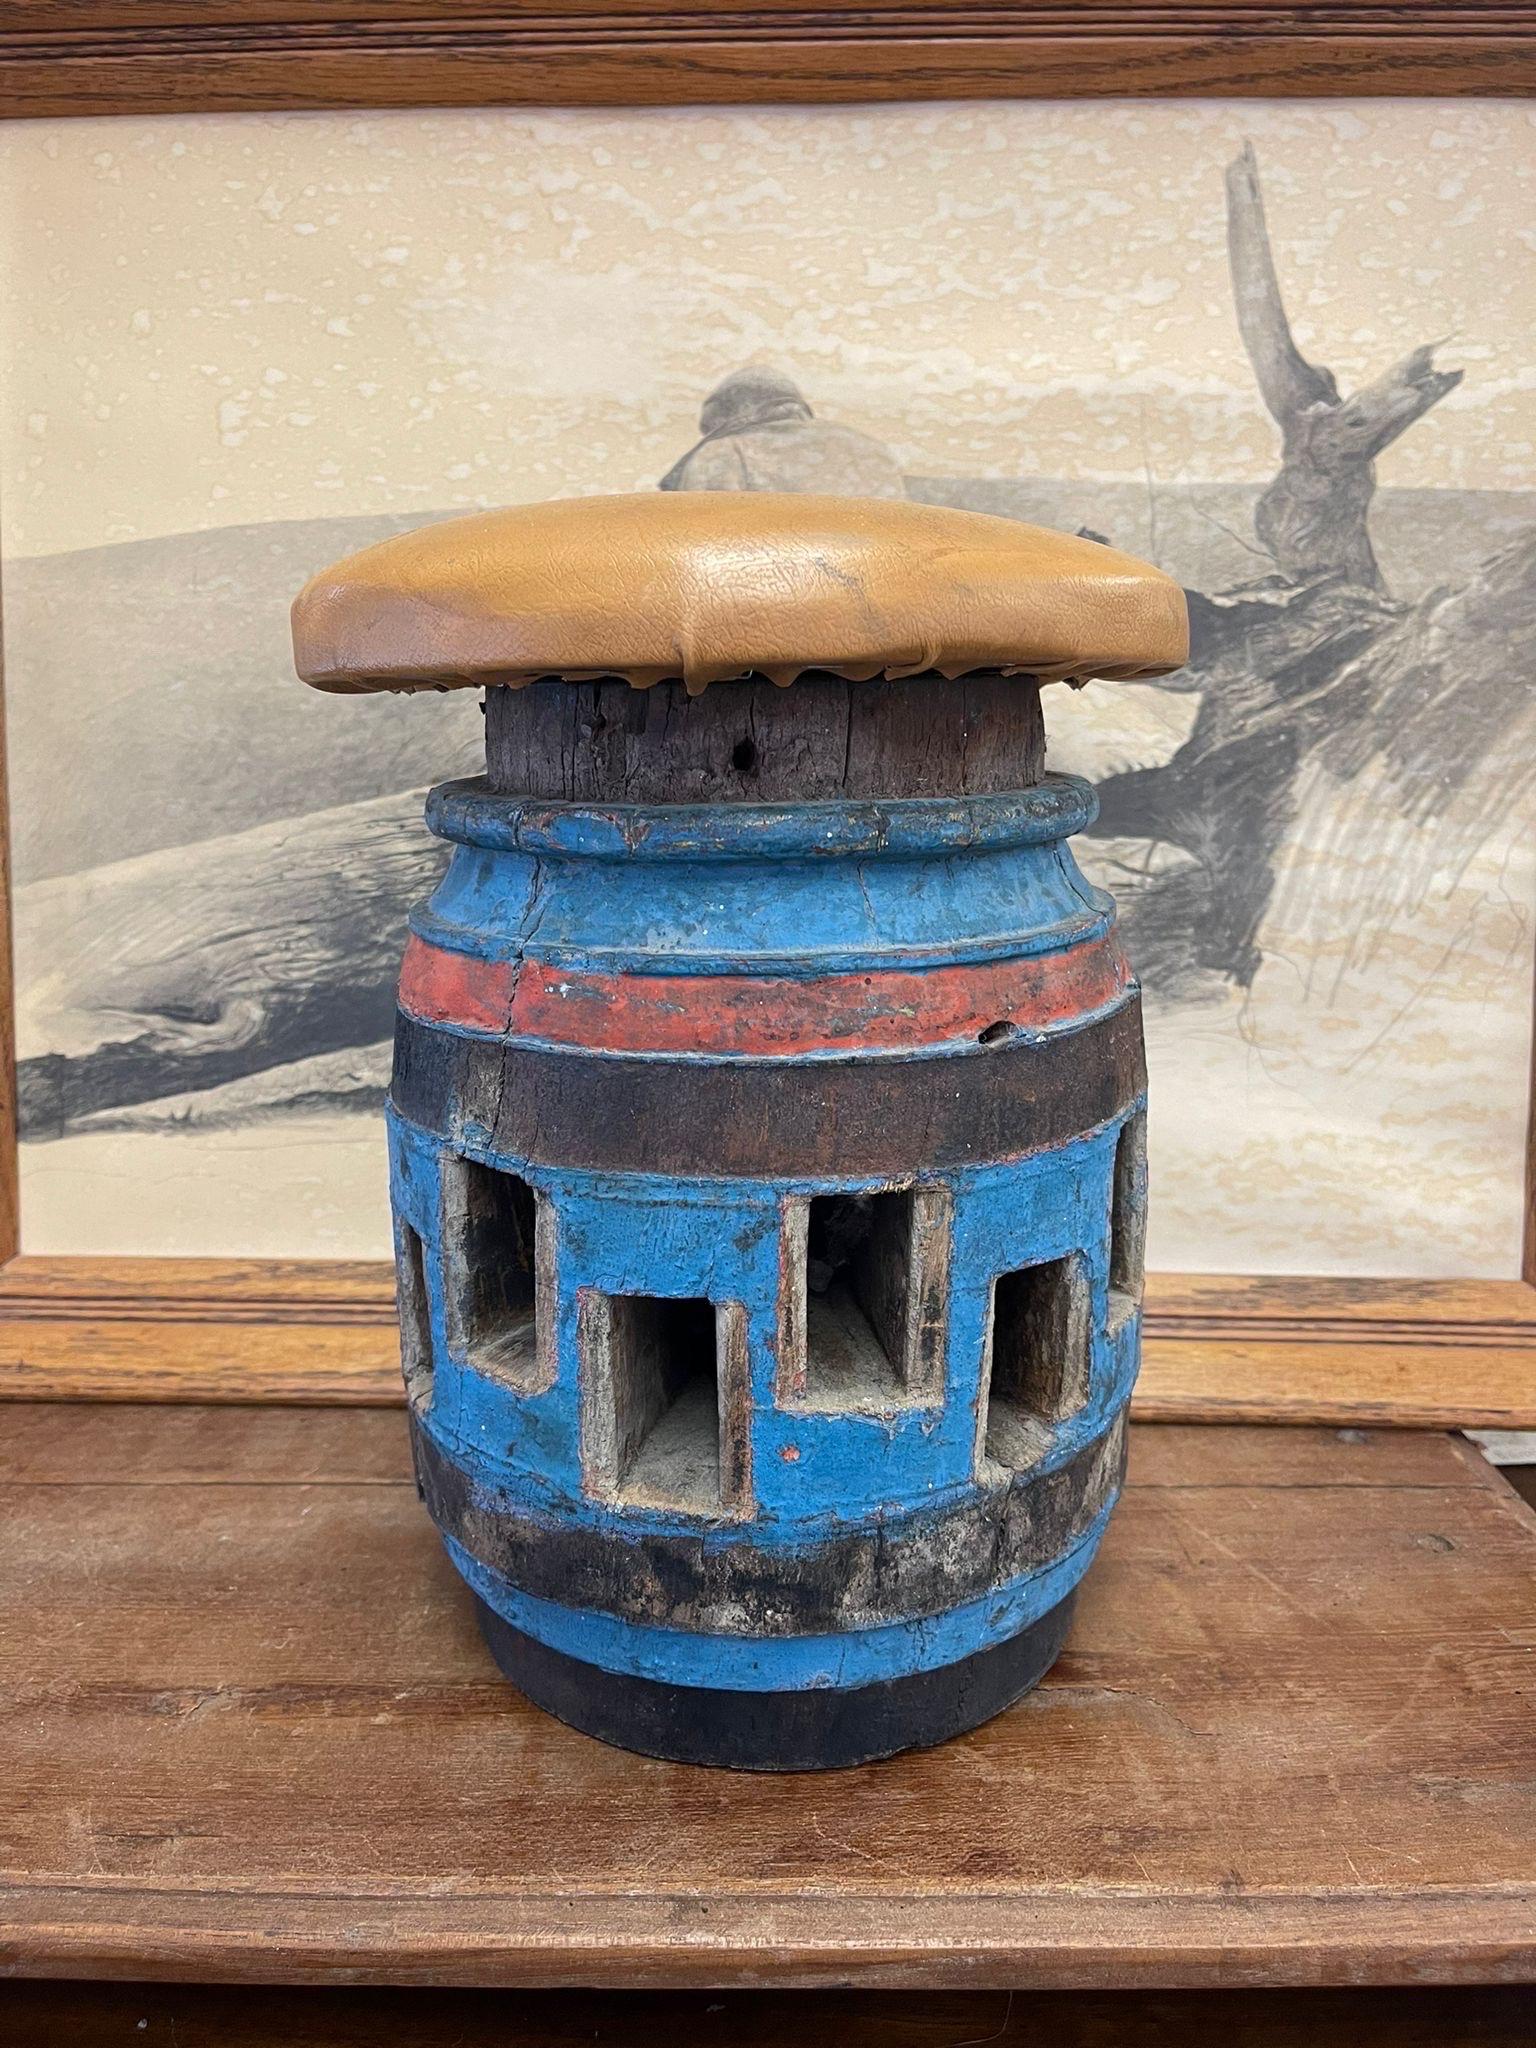 Rustic Art piece with tan seat, could be used as a small stool or footrest. Rad, blue and black colored Accents. Vintage Condition Consistent with Age as Pictured.

Dimensions. 9 Diameter; 13 H